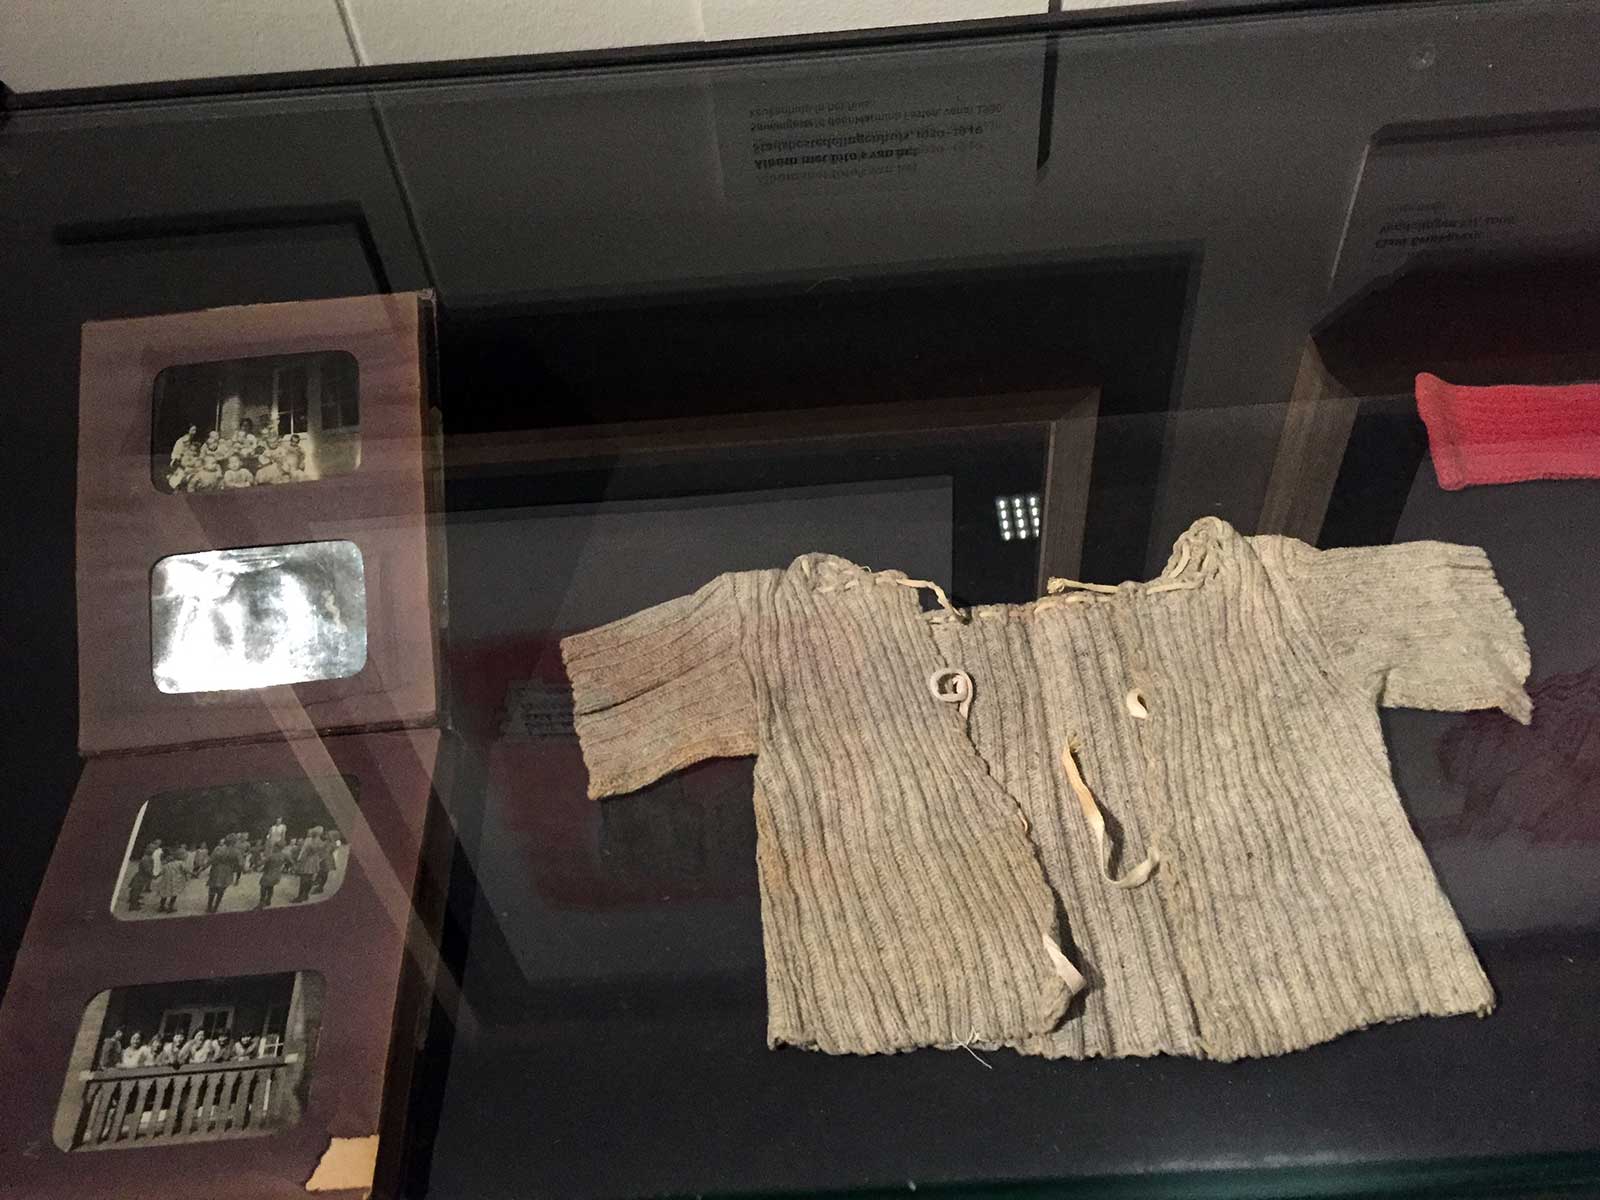 Cardigan of Amsterdam orphan child and old photos on display